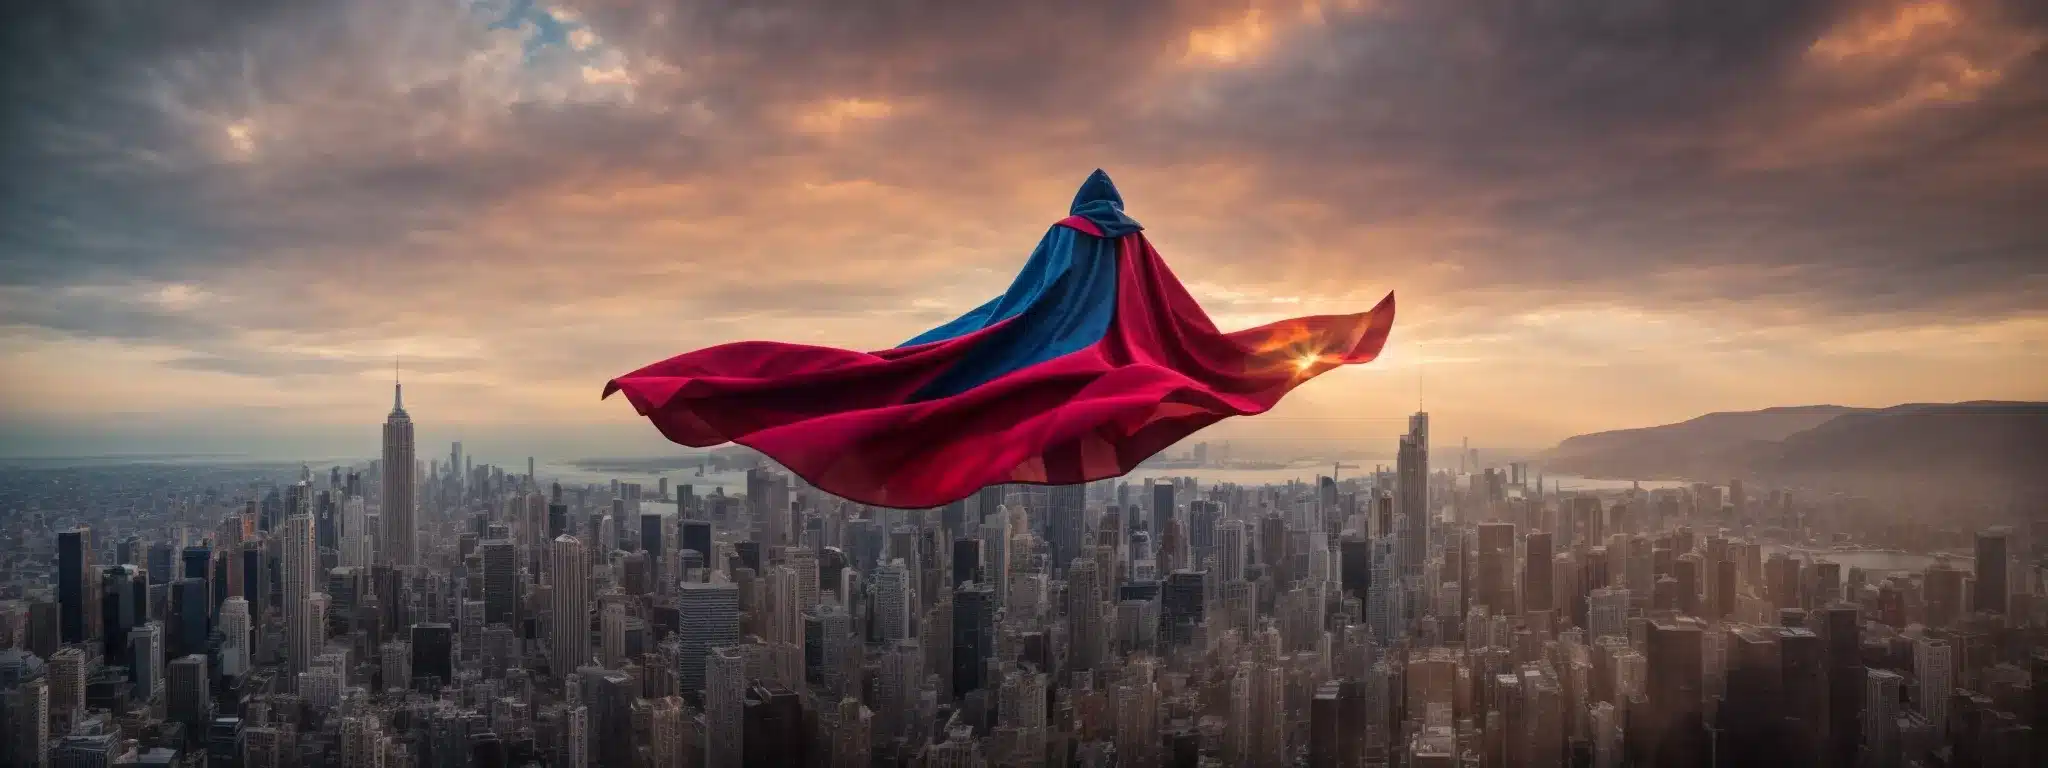 A Vibrantly Colored Superhero Cape Catches The Wind Atop A Dramatic Skyline, Symbolizing A Distinctive And Memorable Brand Identity.